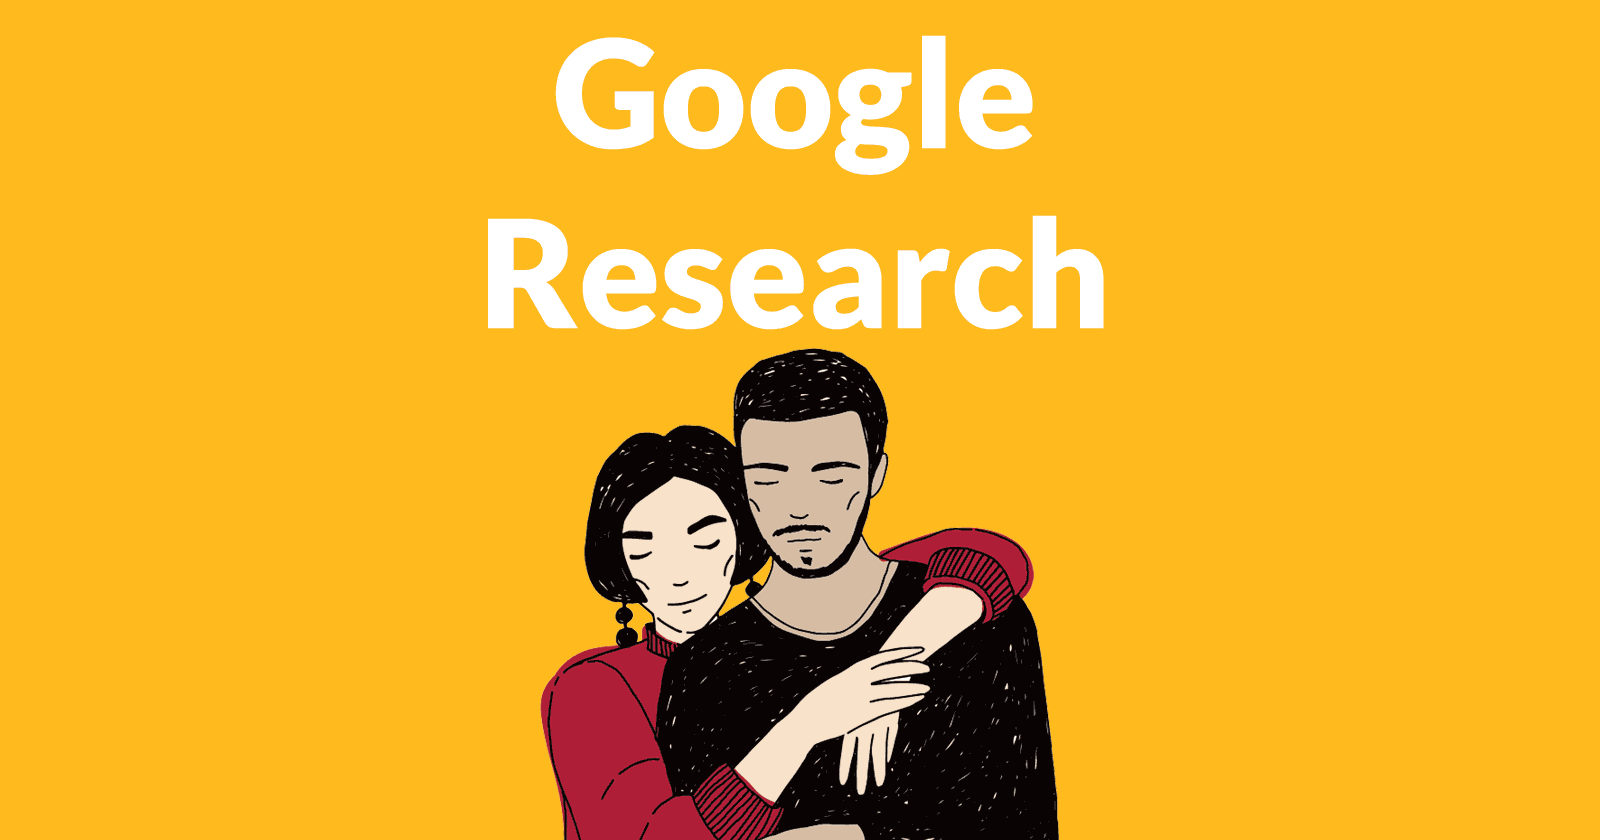 Image of a couple embracing affectionately. Image represents a human need state. The words Google Research is written over the couple.